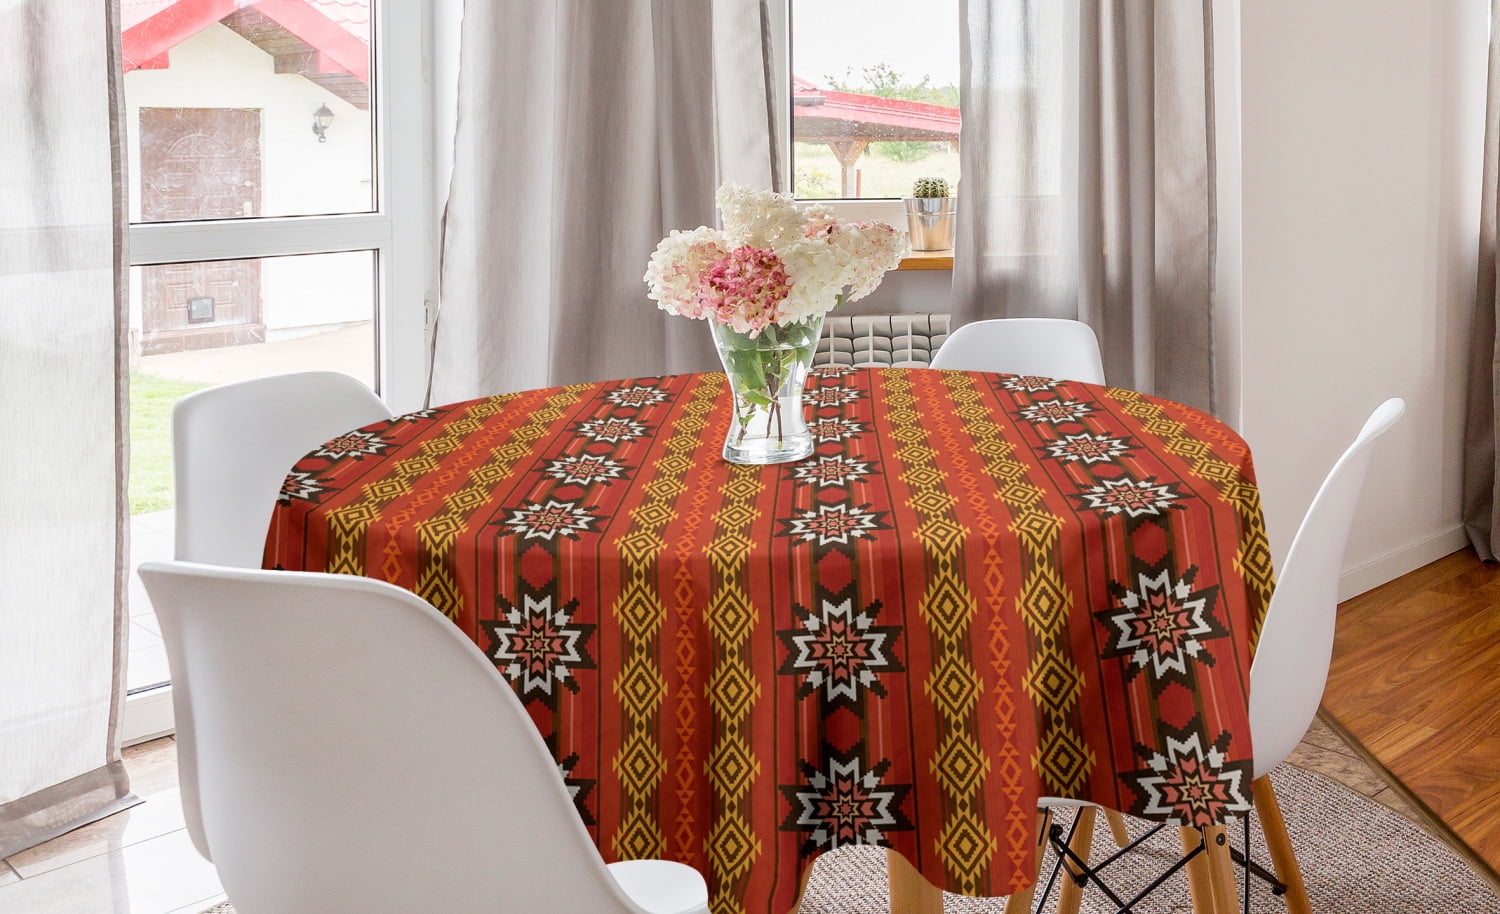 Bohemian Art Native Culture Elements Folkloric Design Blooming Flowers Ambesonne Moroccan Tablecloth Multicolor 52 X 70 Dining Room Kitchen Rectangular Table Cover